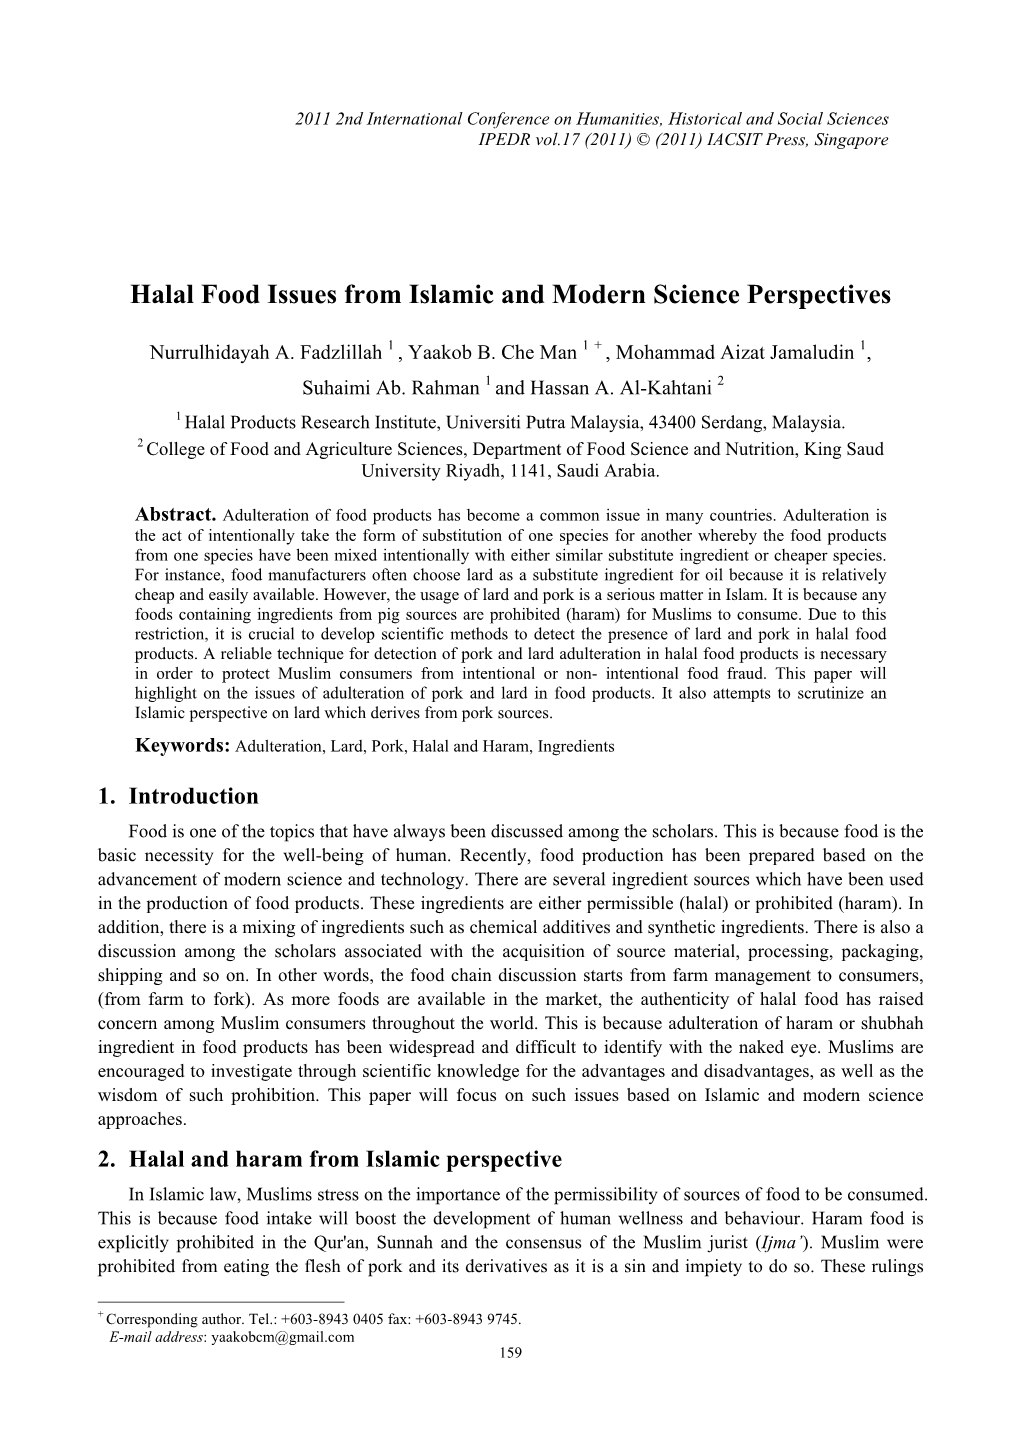 Halal Food Issues from Islamic and Modern Science Perspectives